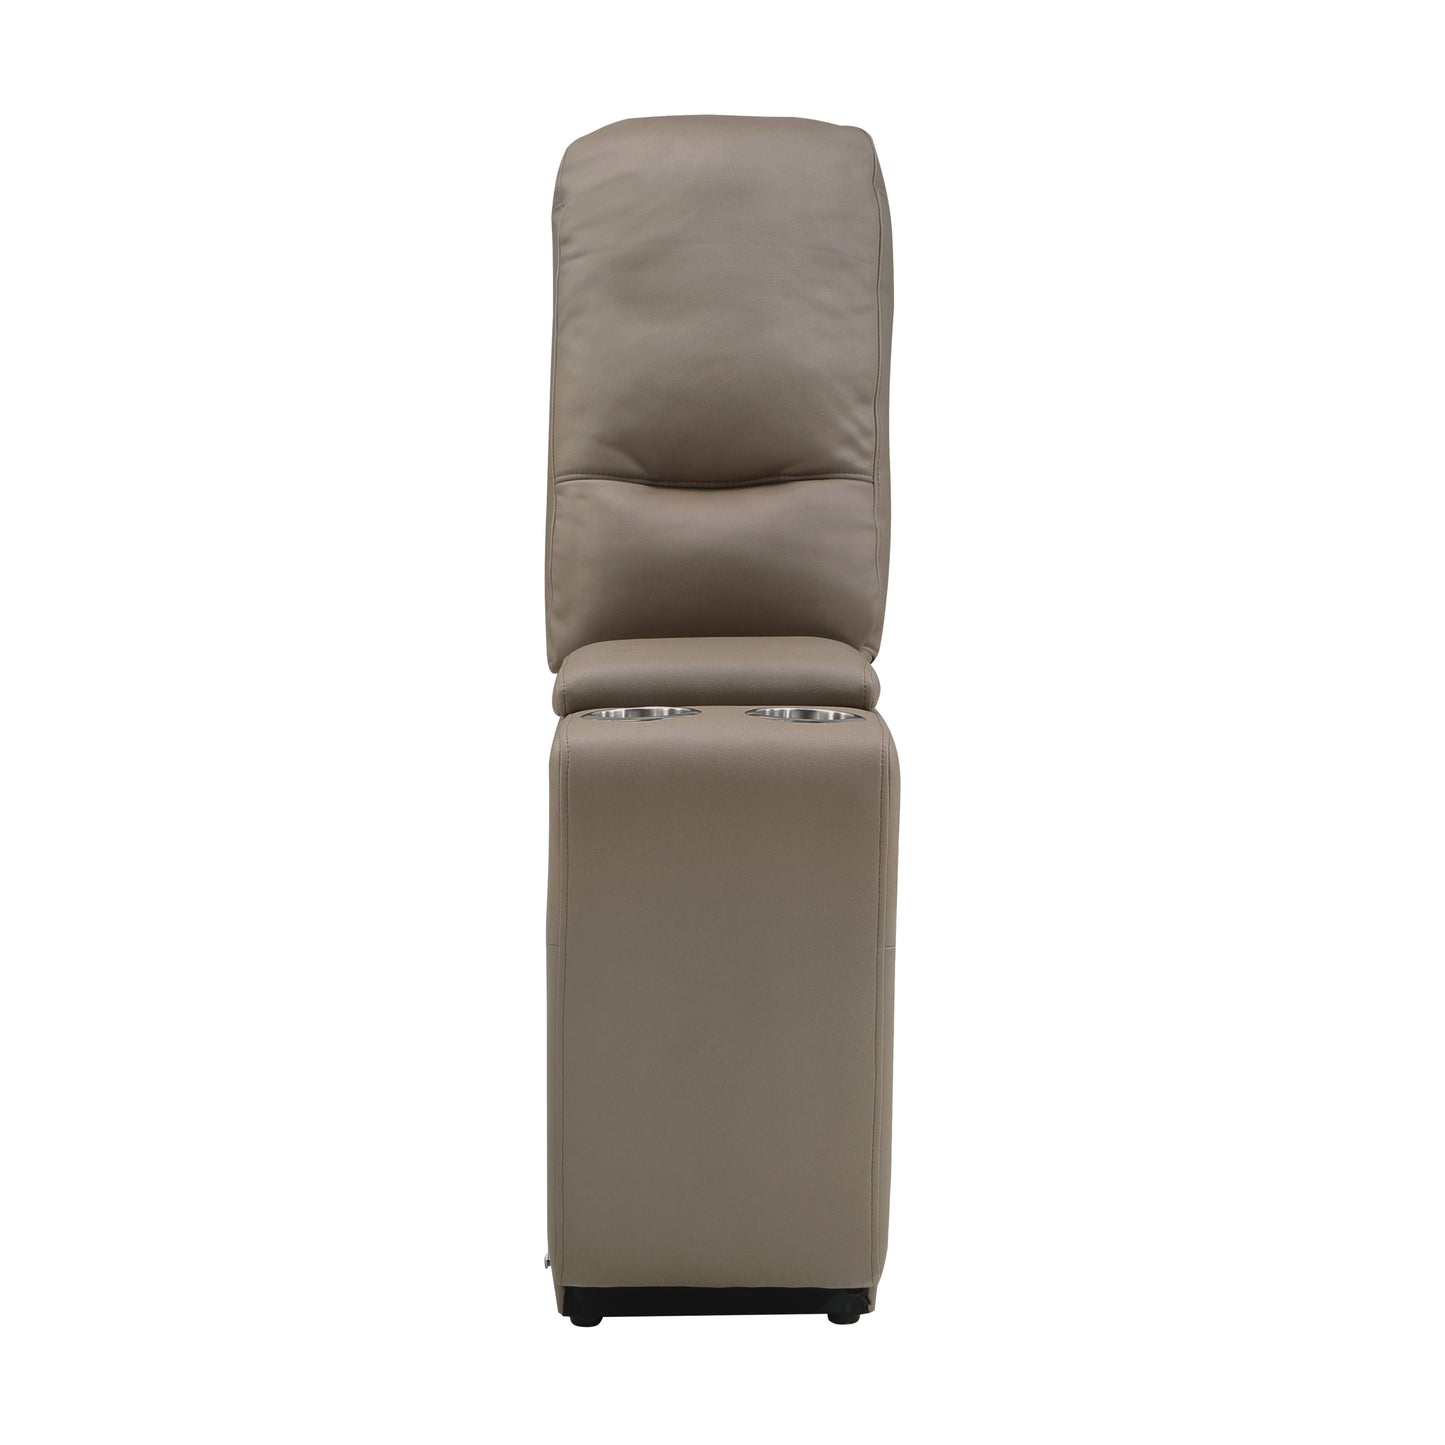 LeGrande Taupe Modular LAF Power Reclining Sectional